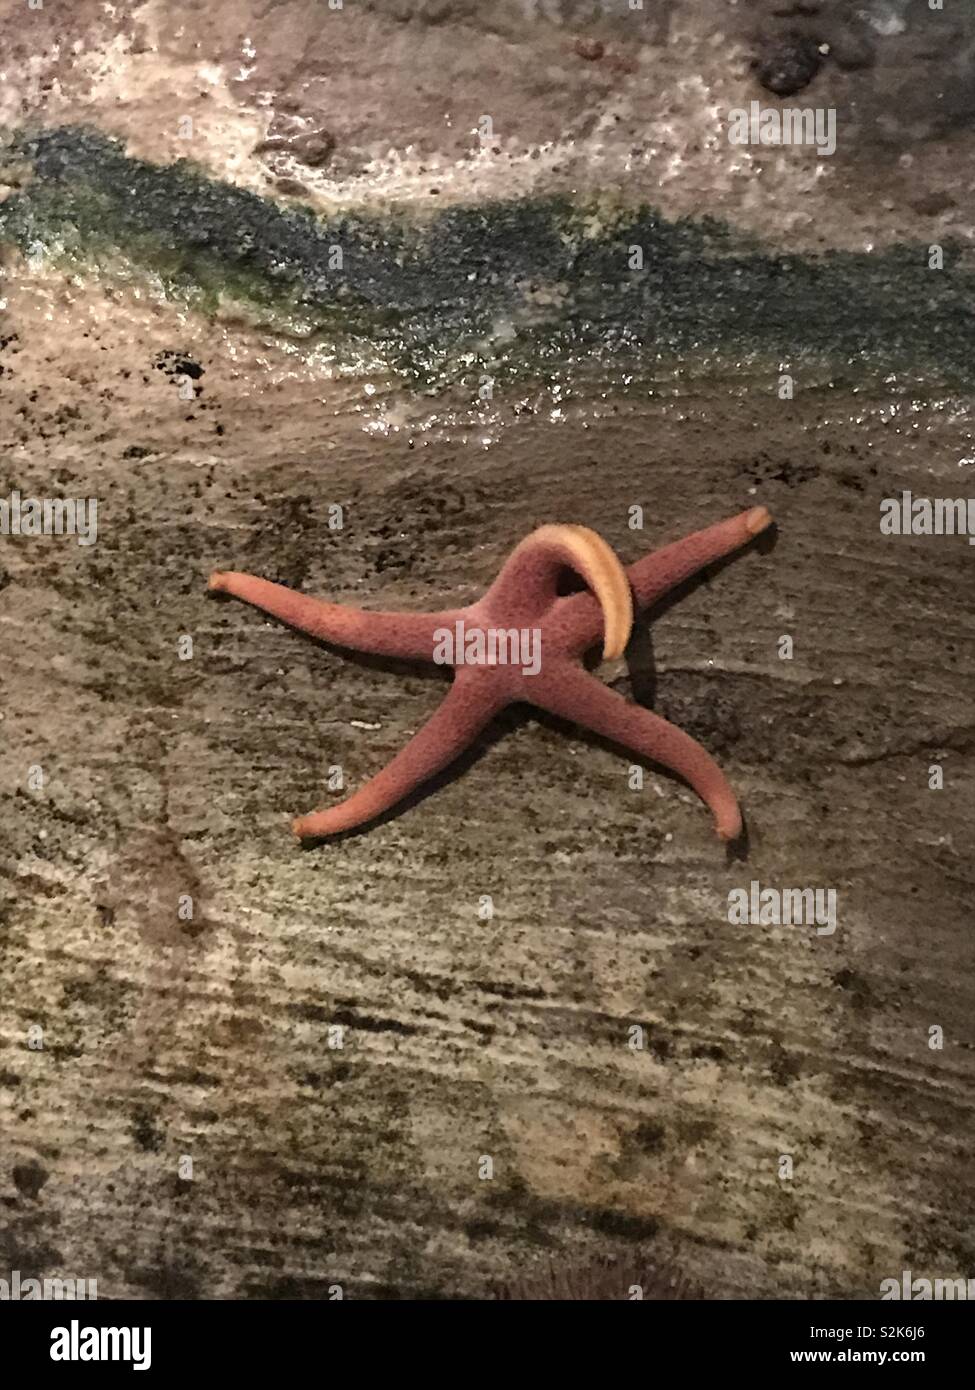 Overturned tentacle red starfish Stock Photo